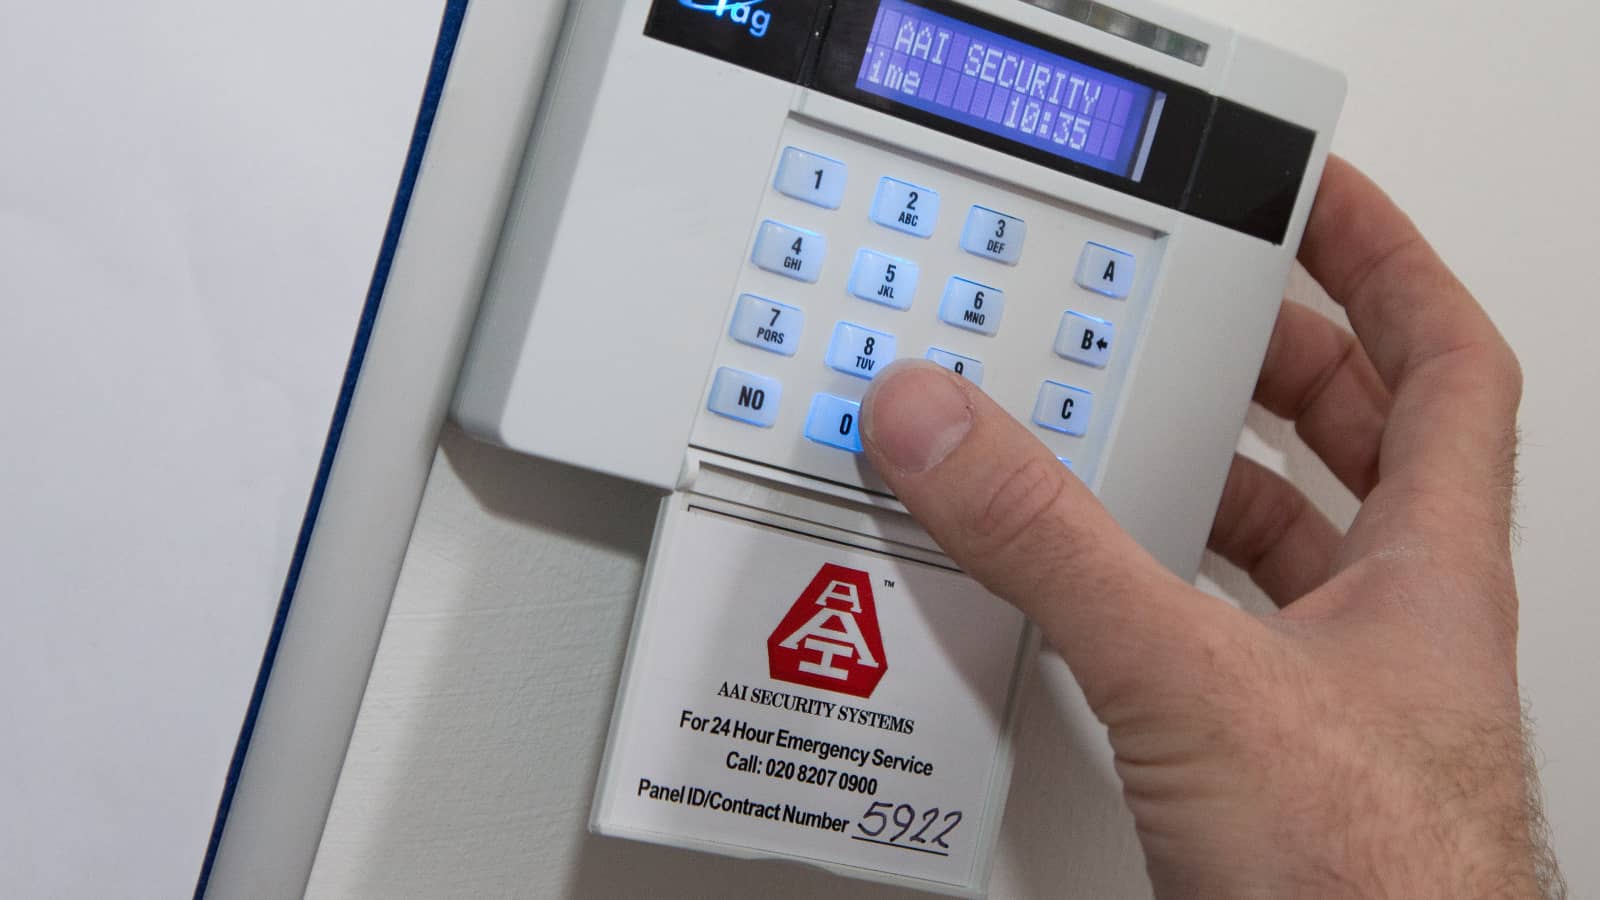 What Is The Hourly Rate Generally For Service Calls For Alarm Systems